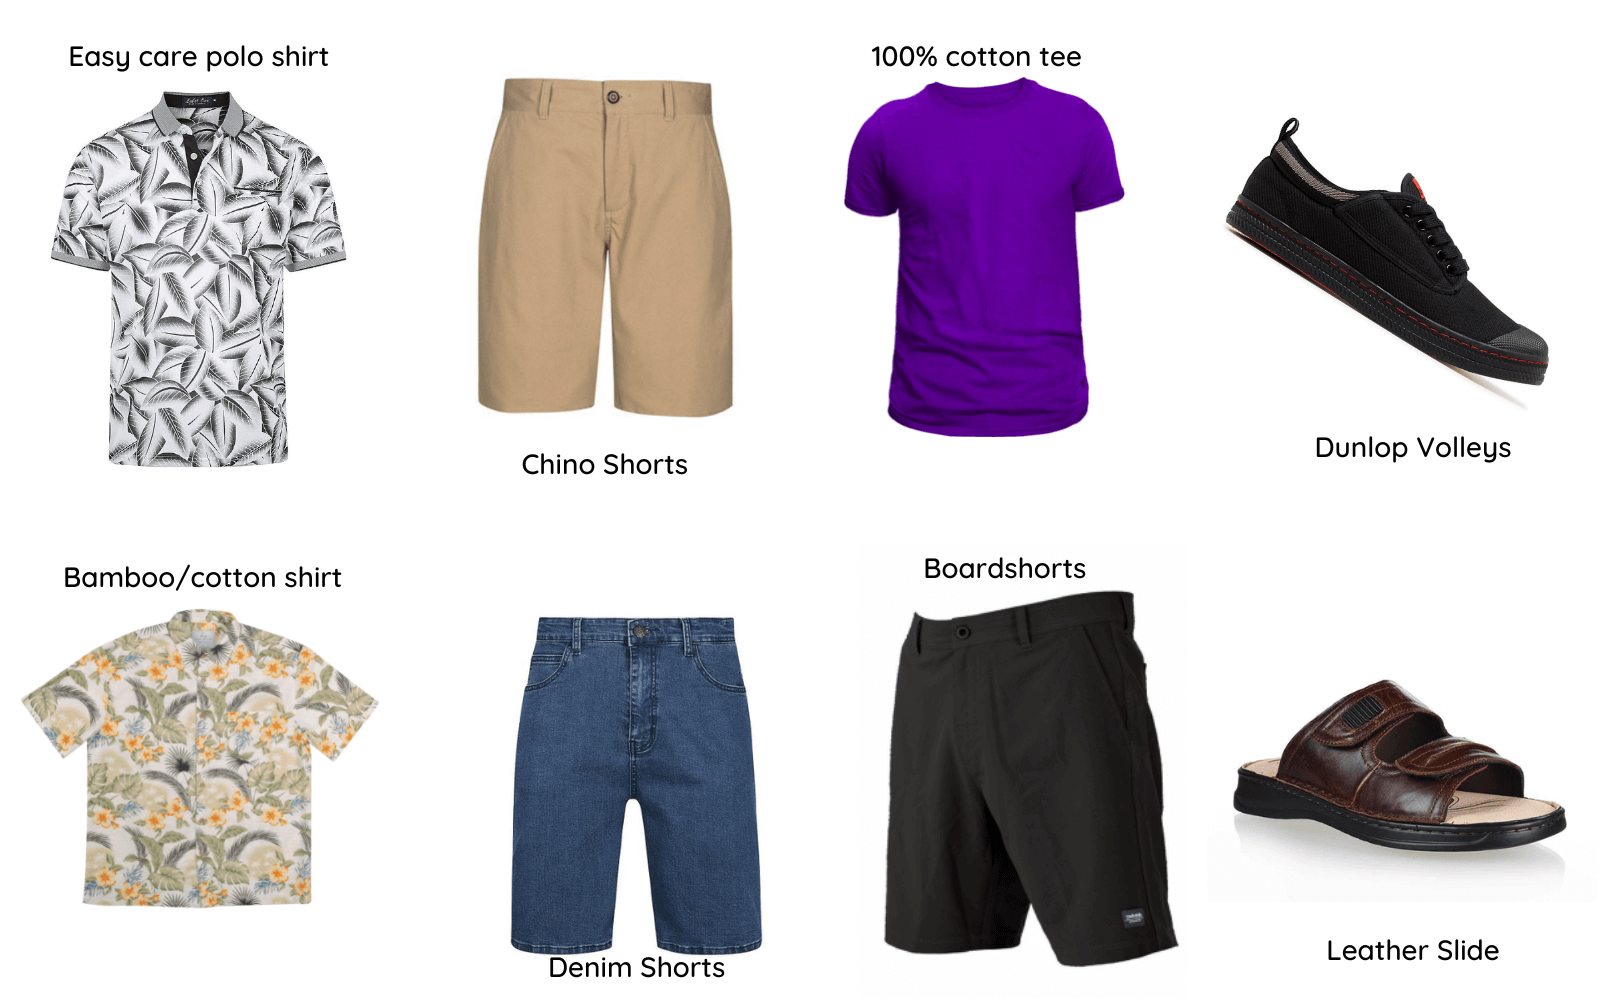 5 must-have summer clothes for men. What should be in every man's closet this summer. Images of the polo shirt and Bamboo shirt. The Chino shorts and denim shorts. Cotton Tee and boardshorts. Dunlop Volleys and Leather Slides